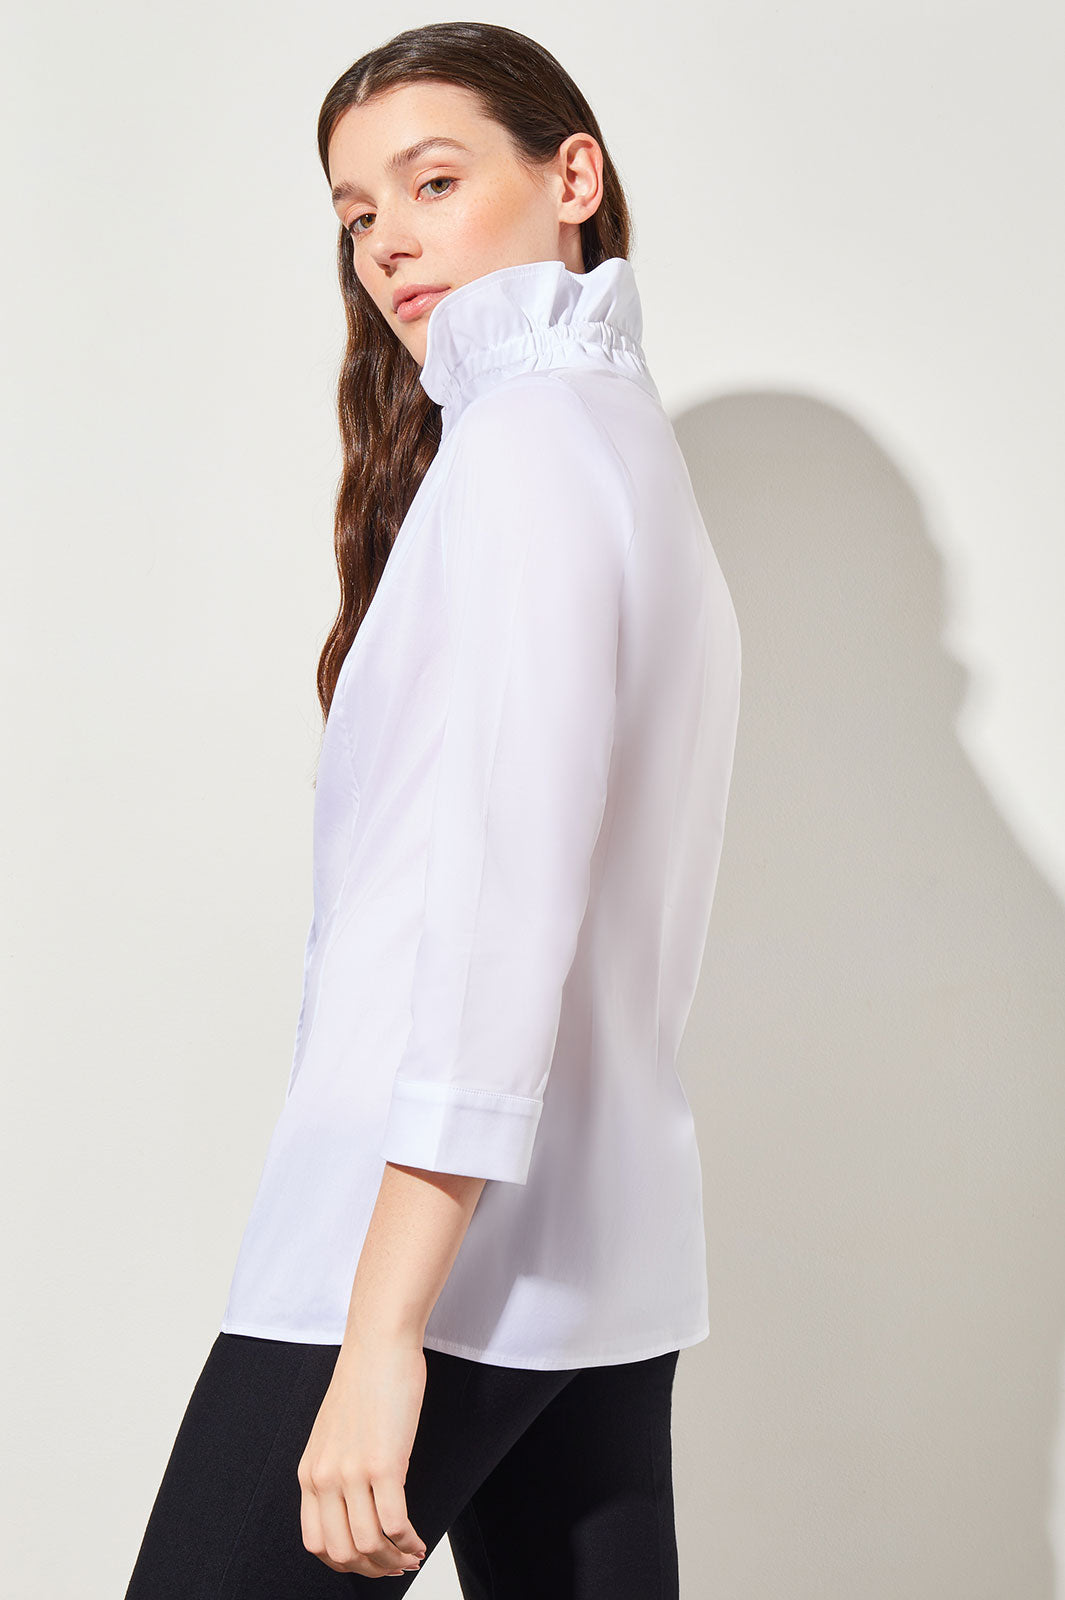 Ruffle-trimmed Cotton Blouse - White - Ladies